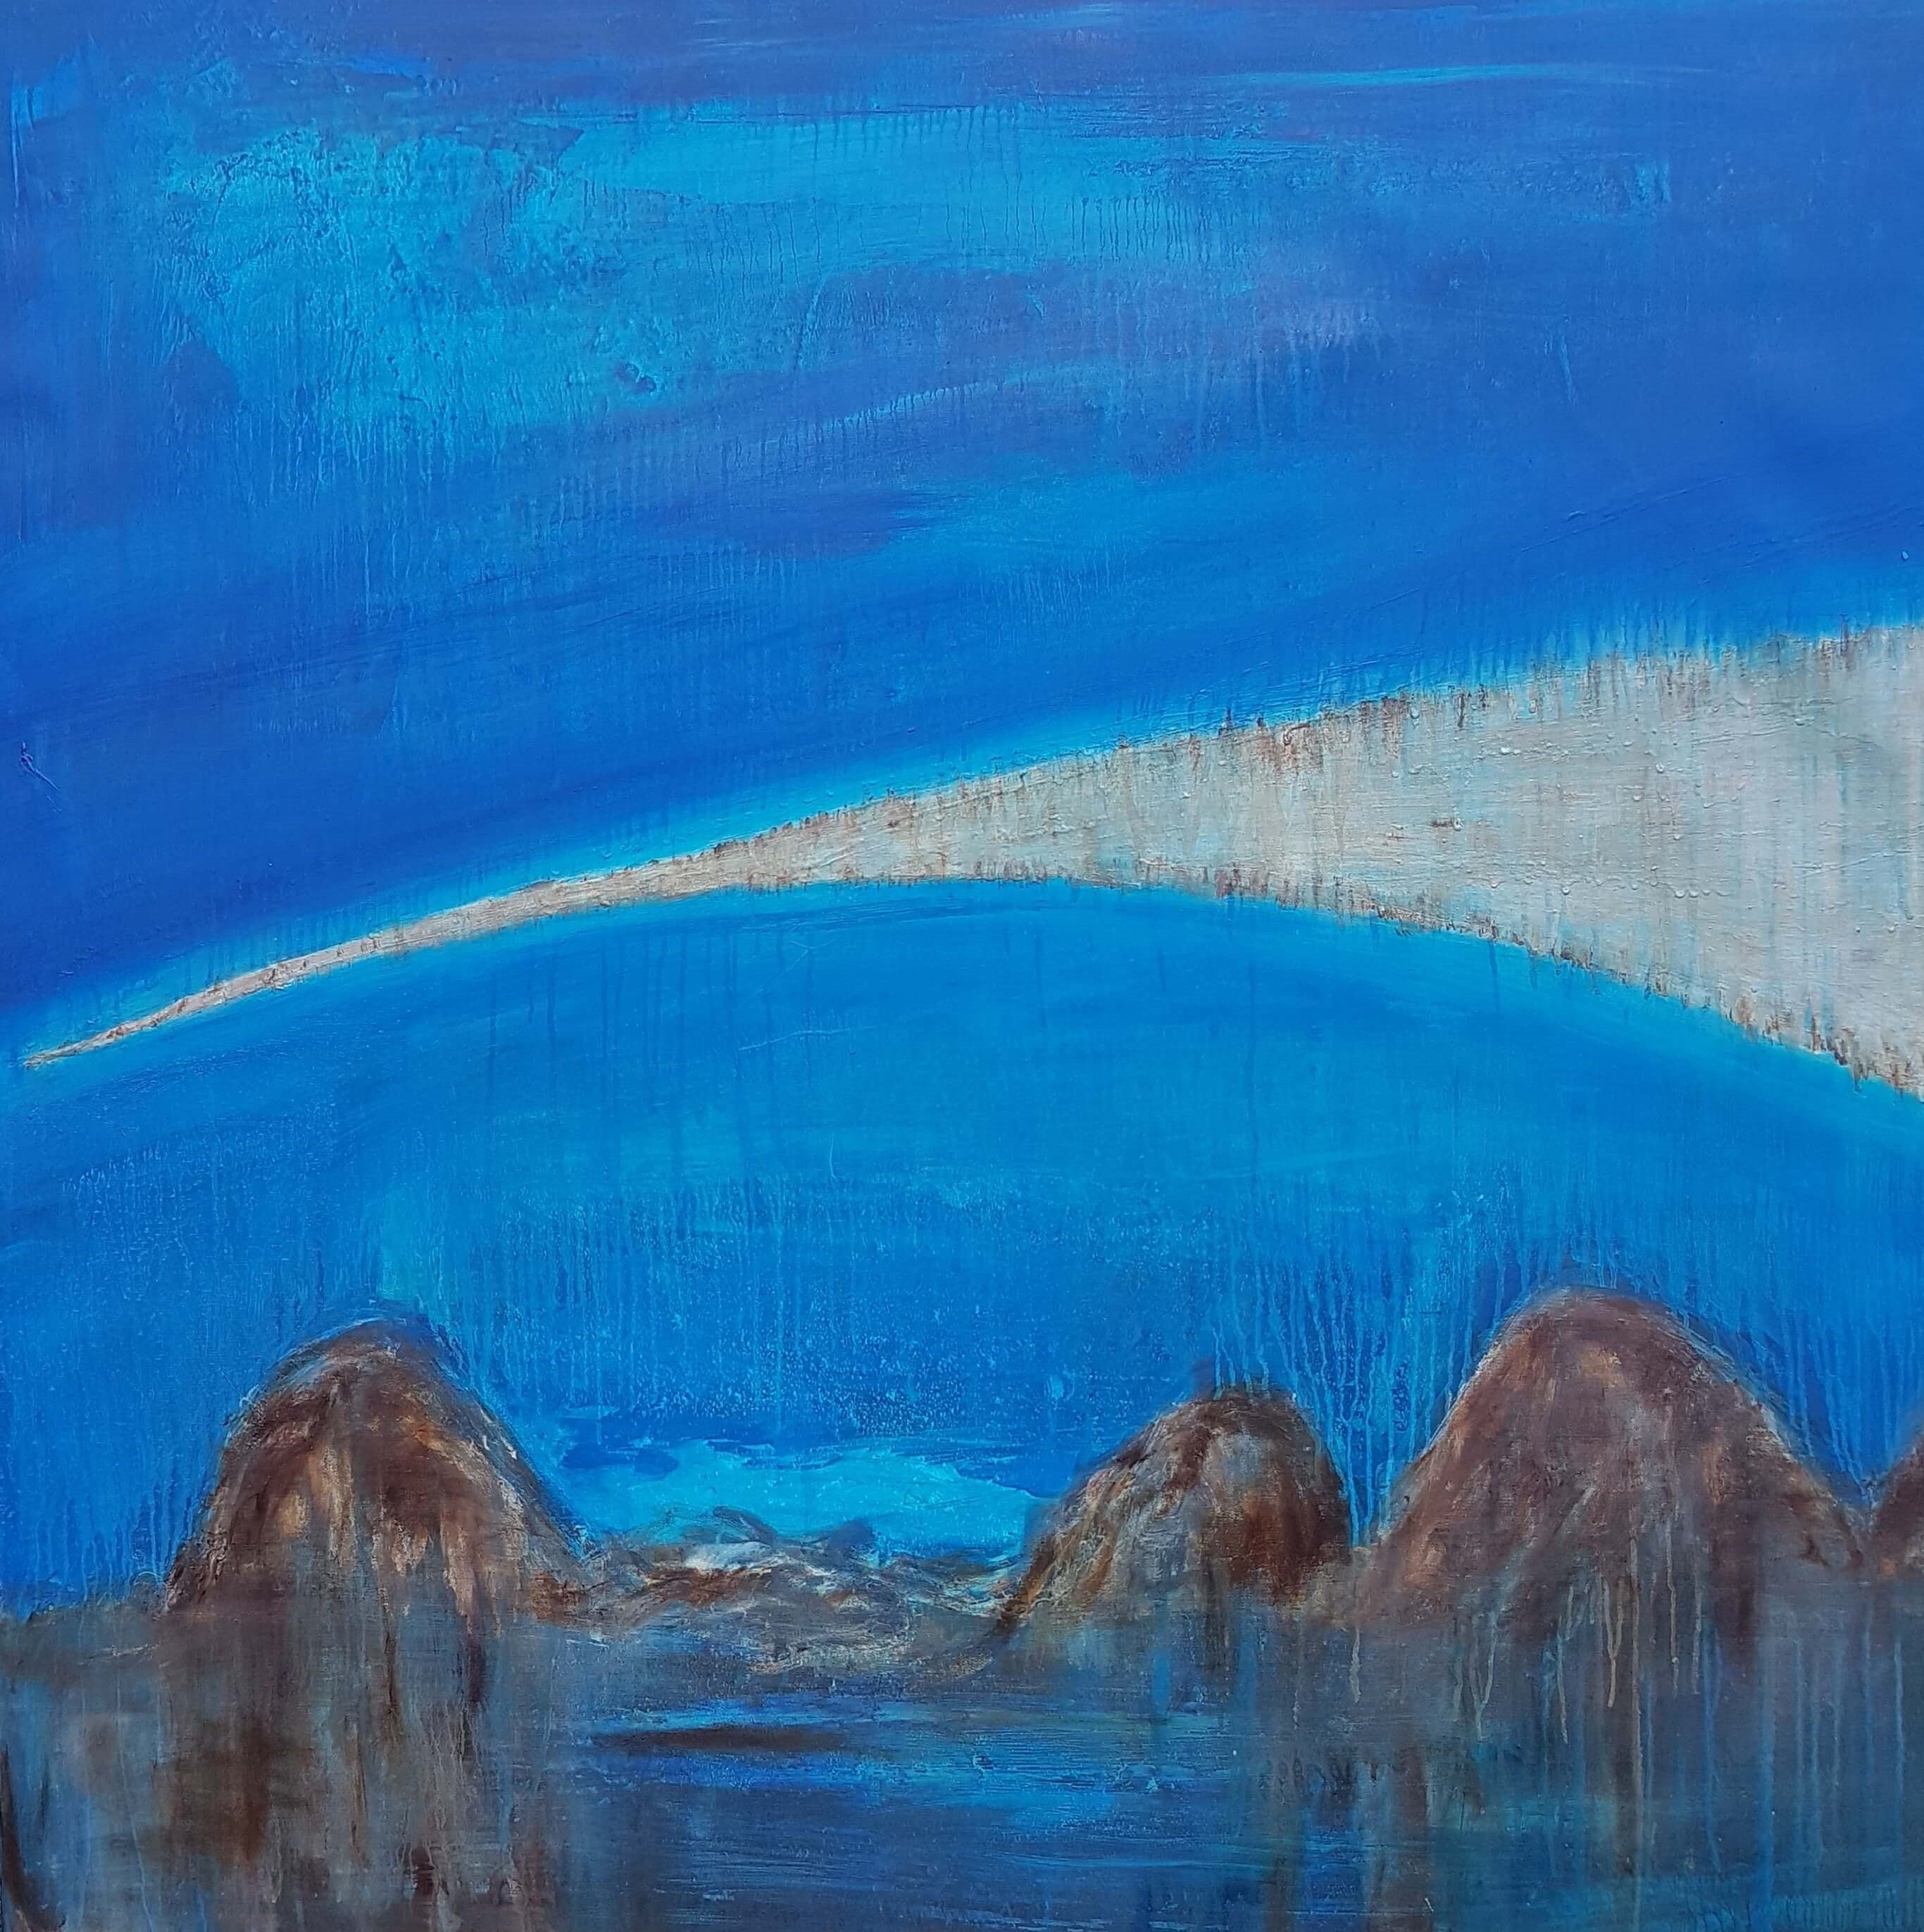 The Passage. Triptych. Oil on canvas. Landscape painting of Bribie Island, Glasshouse Mountains and Pumicestone Passage, connected.  Original art collection, oil painting, female artist, Moreton Bay Region, Australian art,  Australian artist, abstract and figurative art. Queensland, Australia.